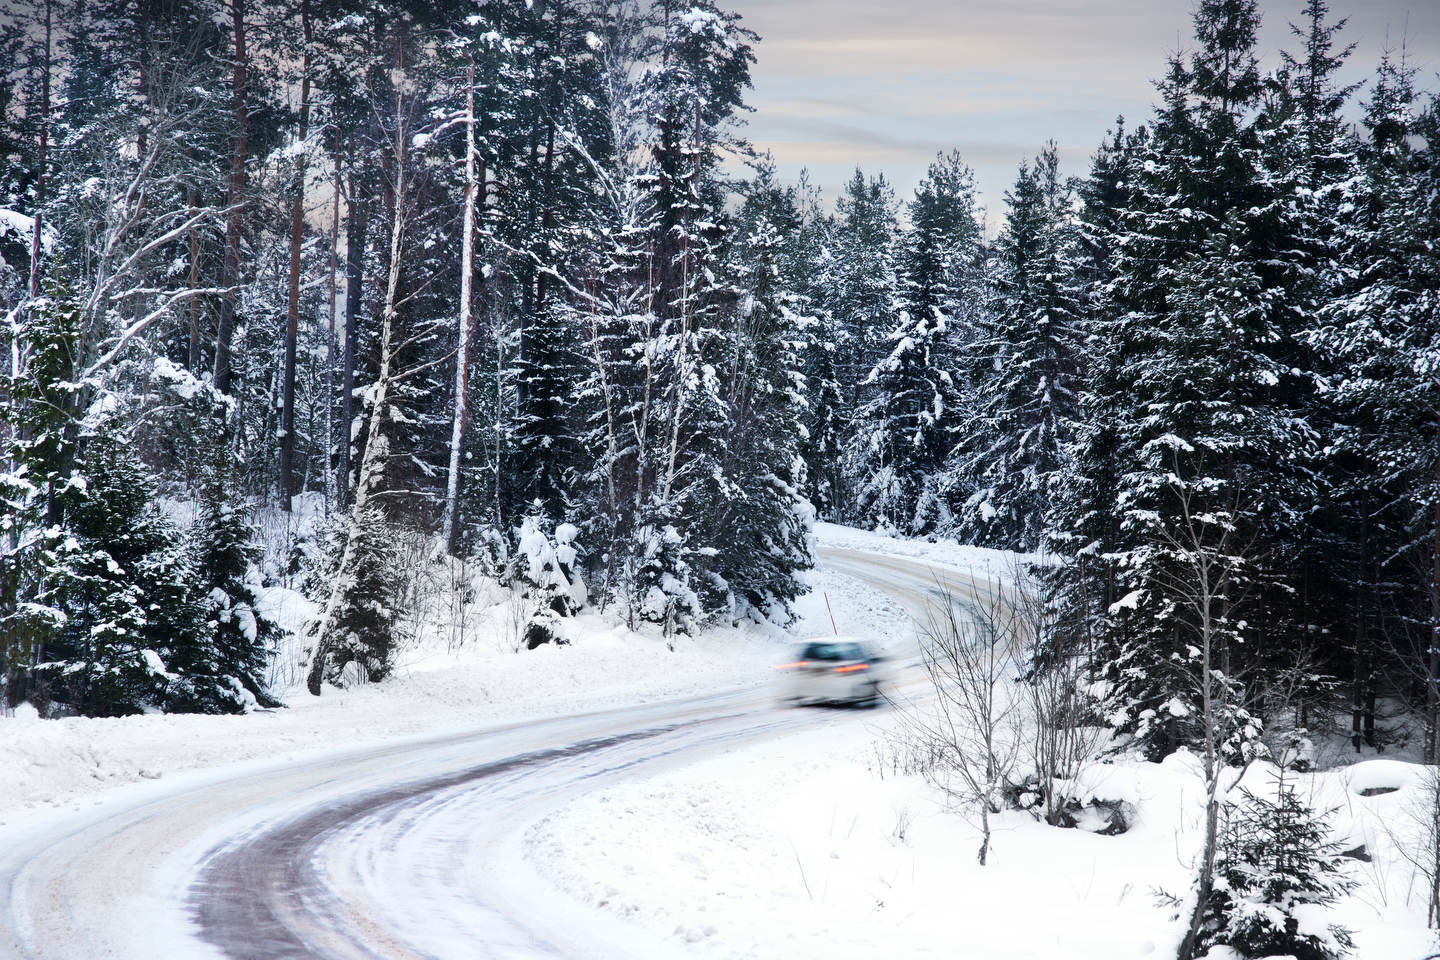 Winter Accessories for Your Mazda: A Guide to Safe and Comfortable Driving